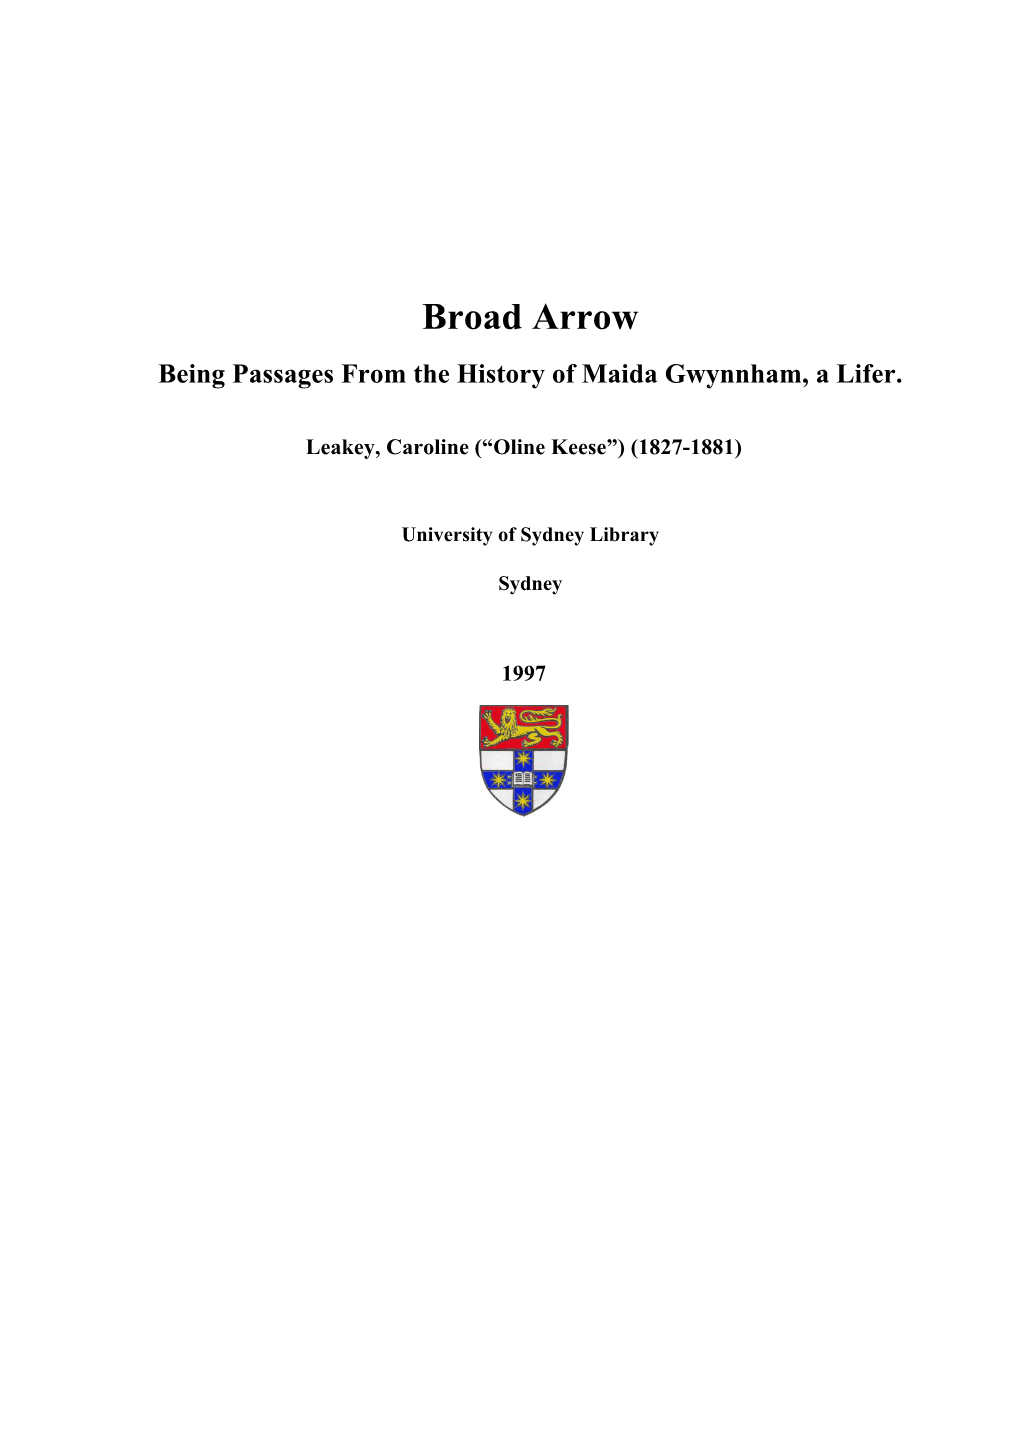 Broad Arrow Being Passages from the History of Maida Gwynnham, a Lifer